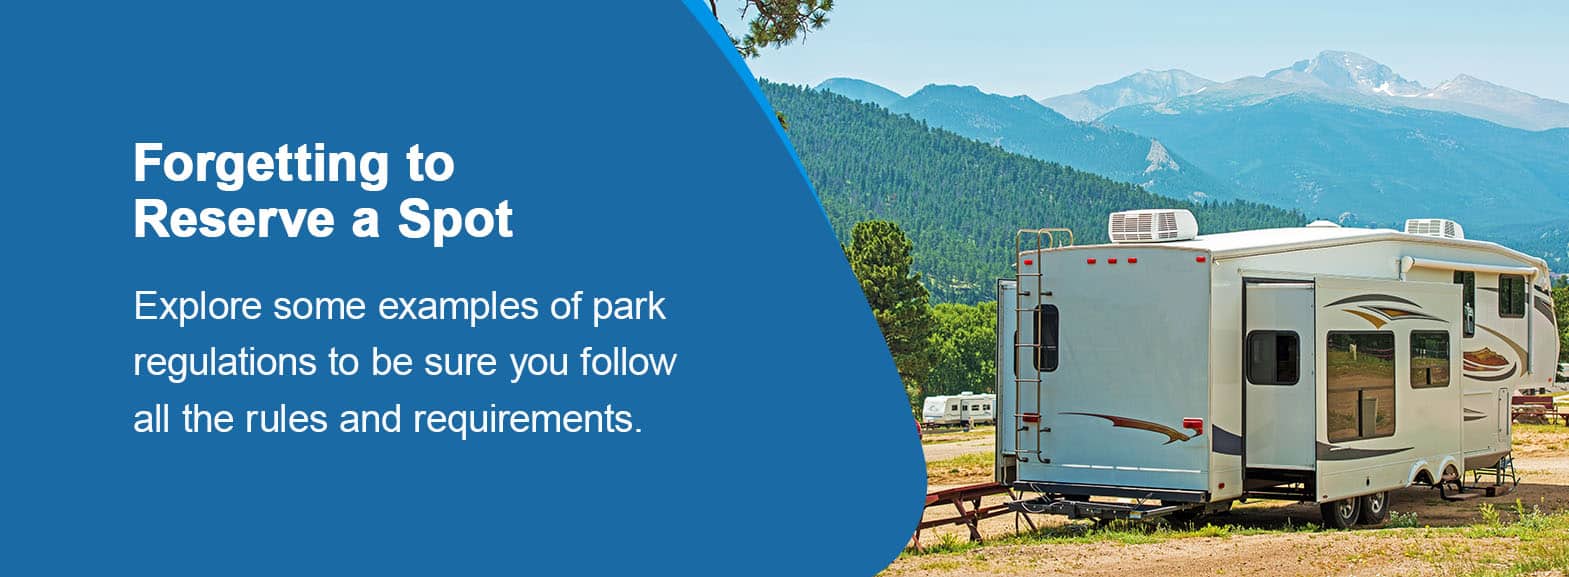 Forgetting to Reserve a Spot. Explore some examples of park regulations to be sure you follow all the rules and requirements.